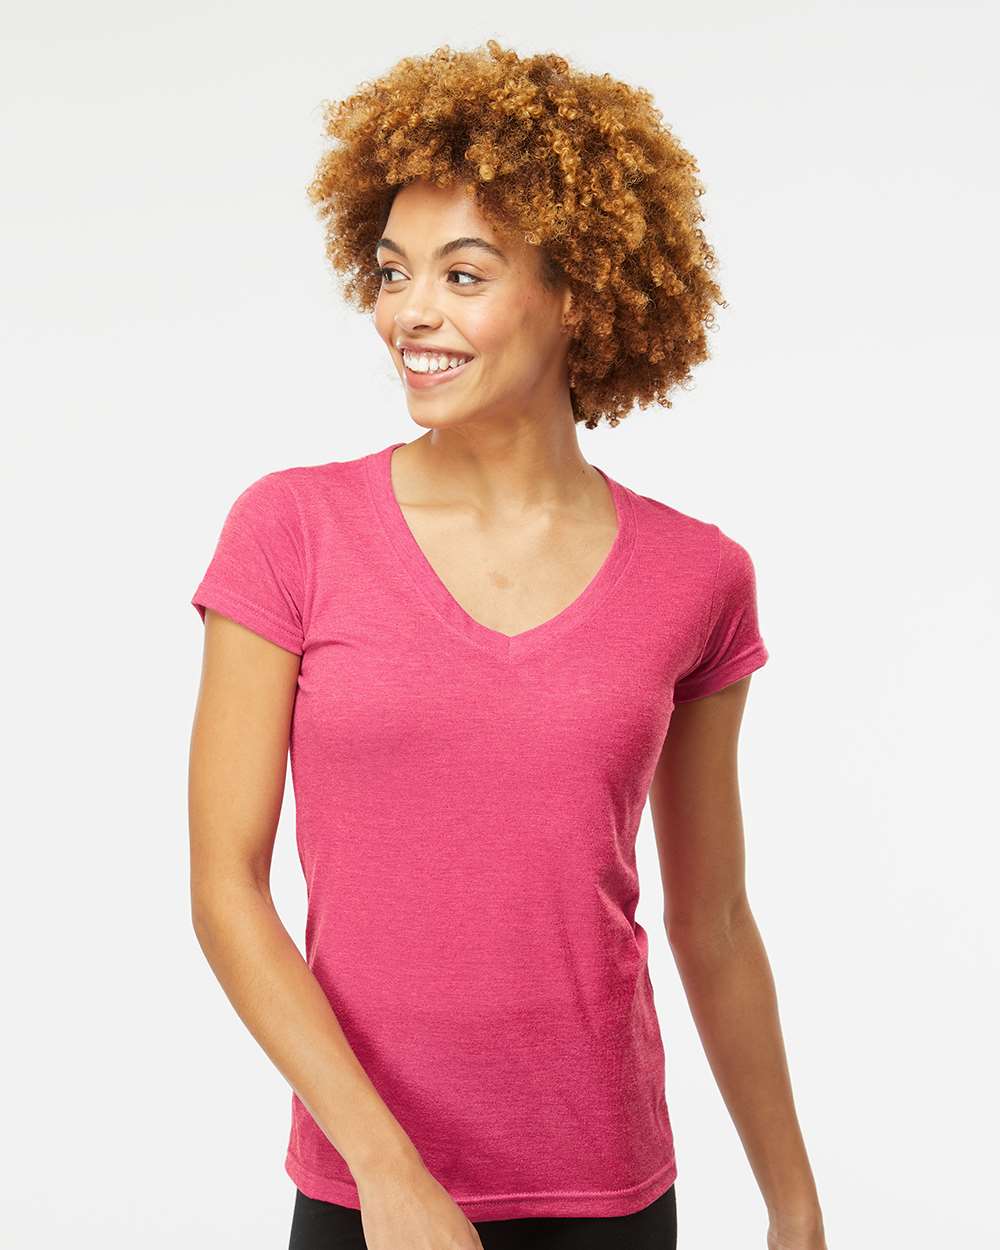 M&O Women's Deluxe Blend V-Neck T-Shirt 3542 #colormdl_Heather Fuchsia